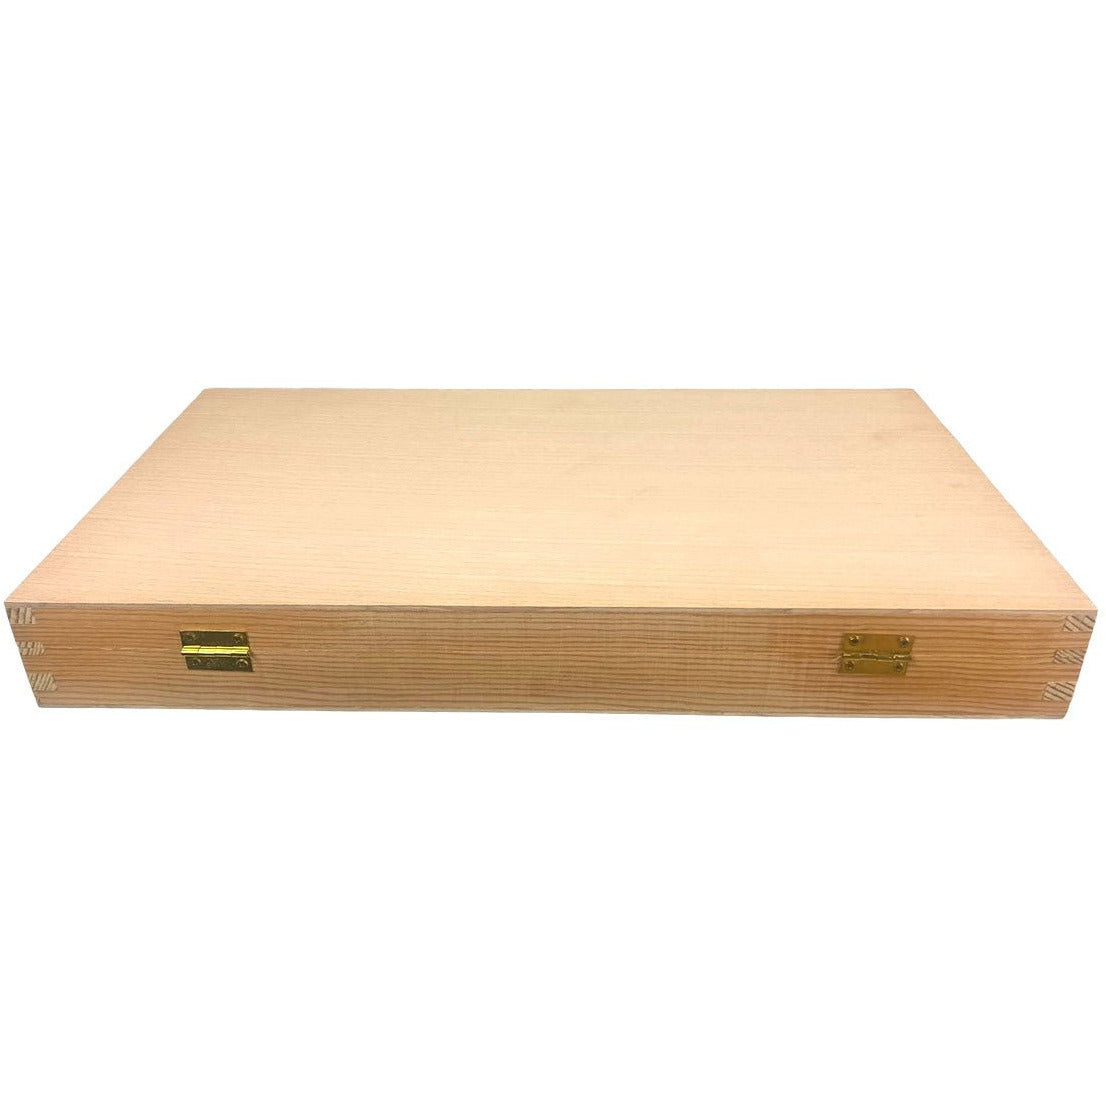 15 X 9 X 2 Inch Felt Lined Wooden Box With Metal Hinges And Clasps - TJ05-31475 - ToolUSA